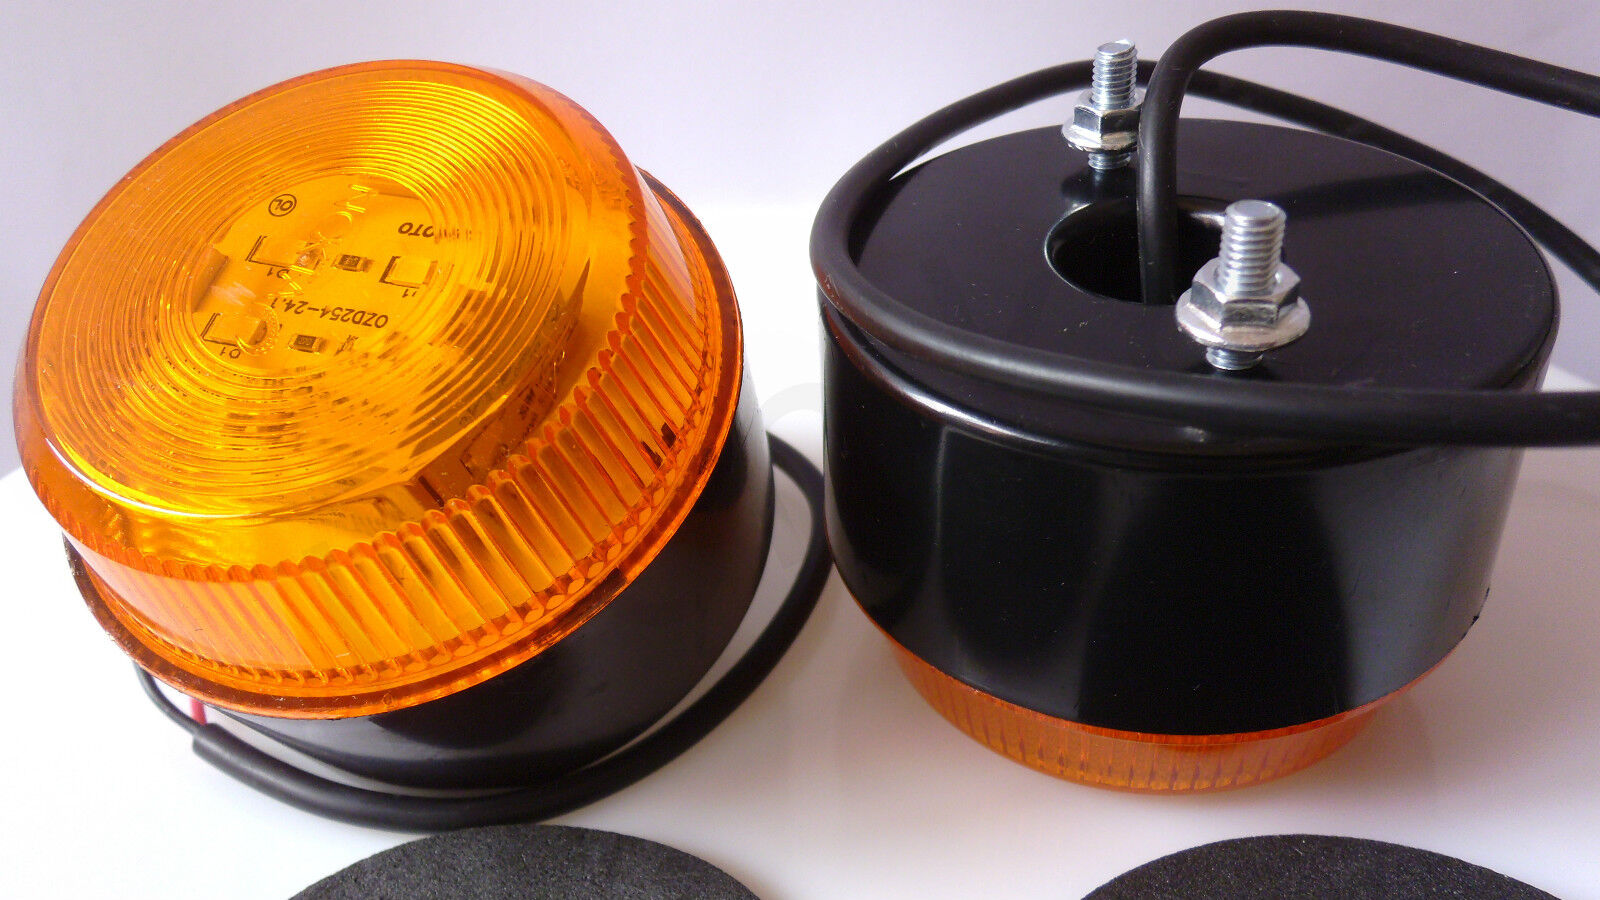 2x 12V 24V AMBER RECOVERY LED BREAKDOWN SAFETY LIGHT FLASHING BE Regular Max 50% OFF discount